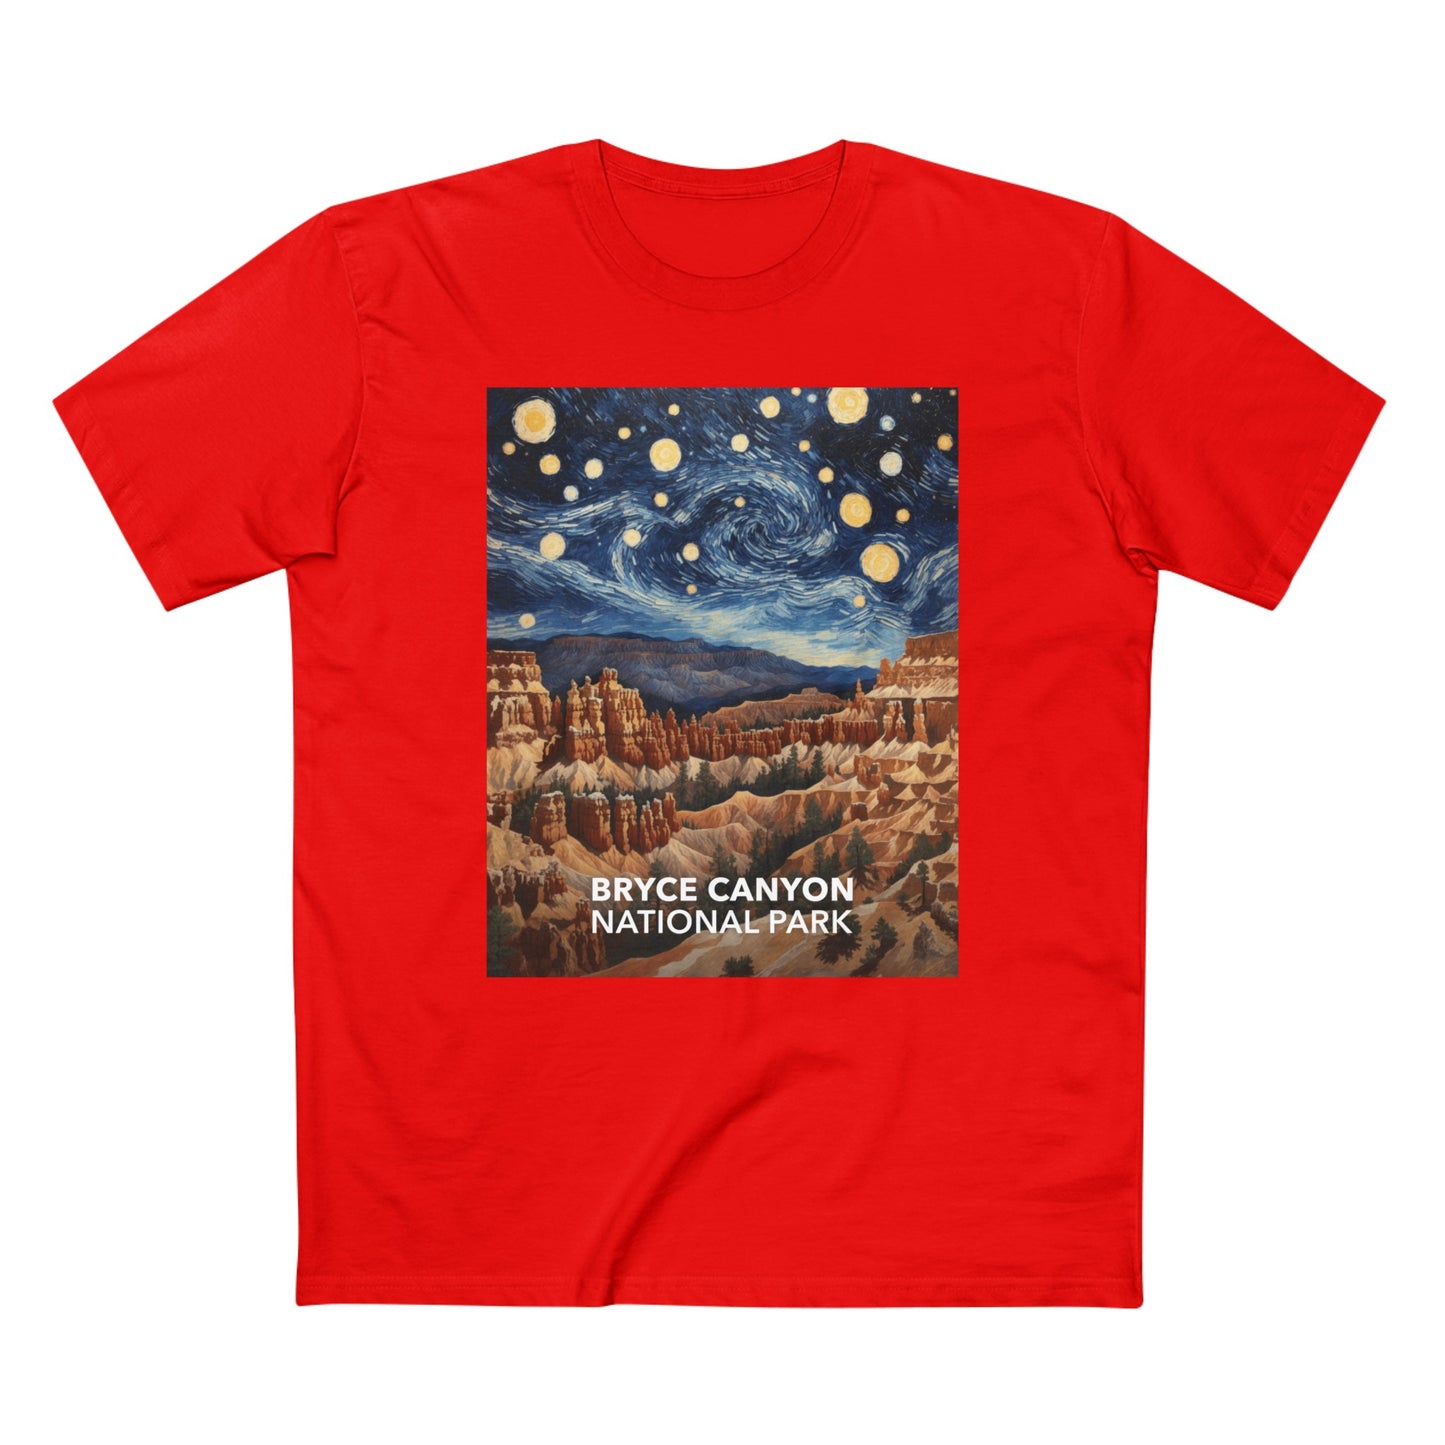 Bryce Canyon National Park T-Shirt - The Starry Night